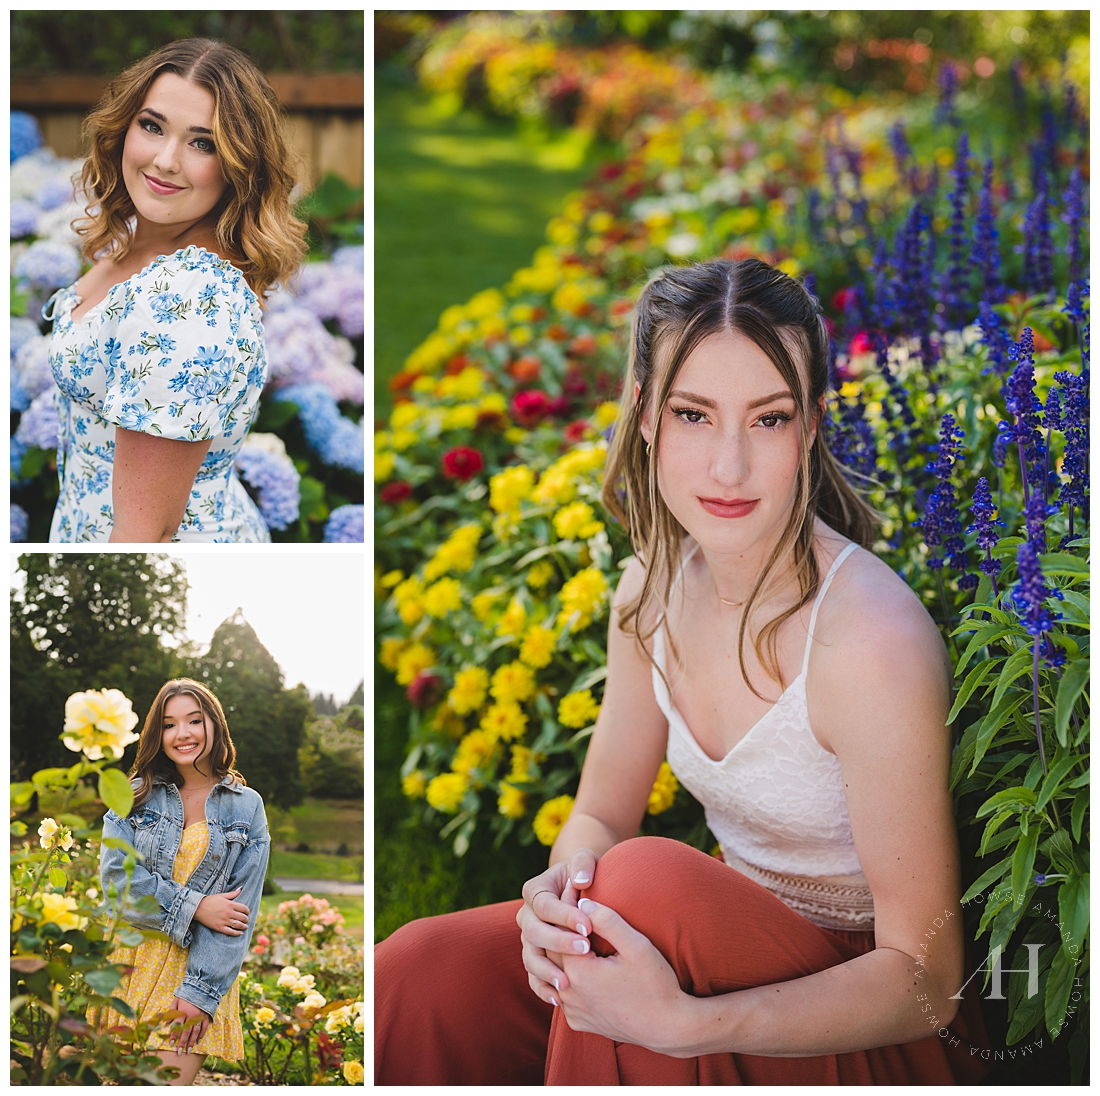 Best High School Senior Portrait Locations with Gorgeous Wildflowers | Photographed by the Best Tacoma Senior Portrait Photographer Amanda Howse